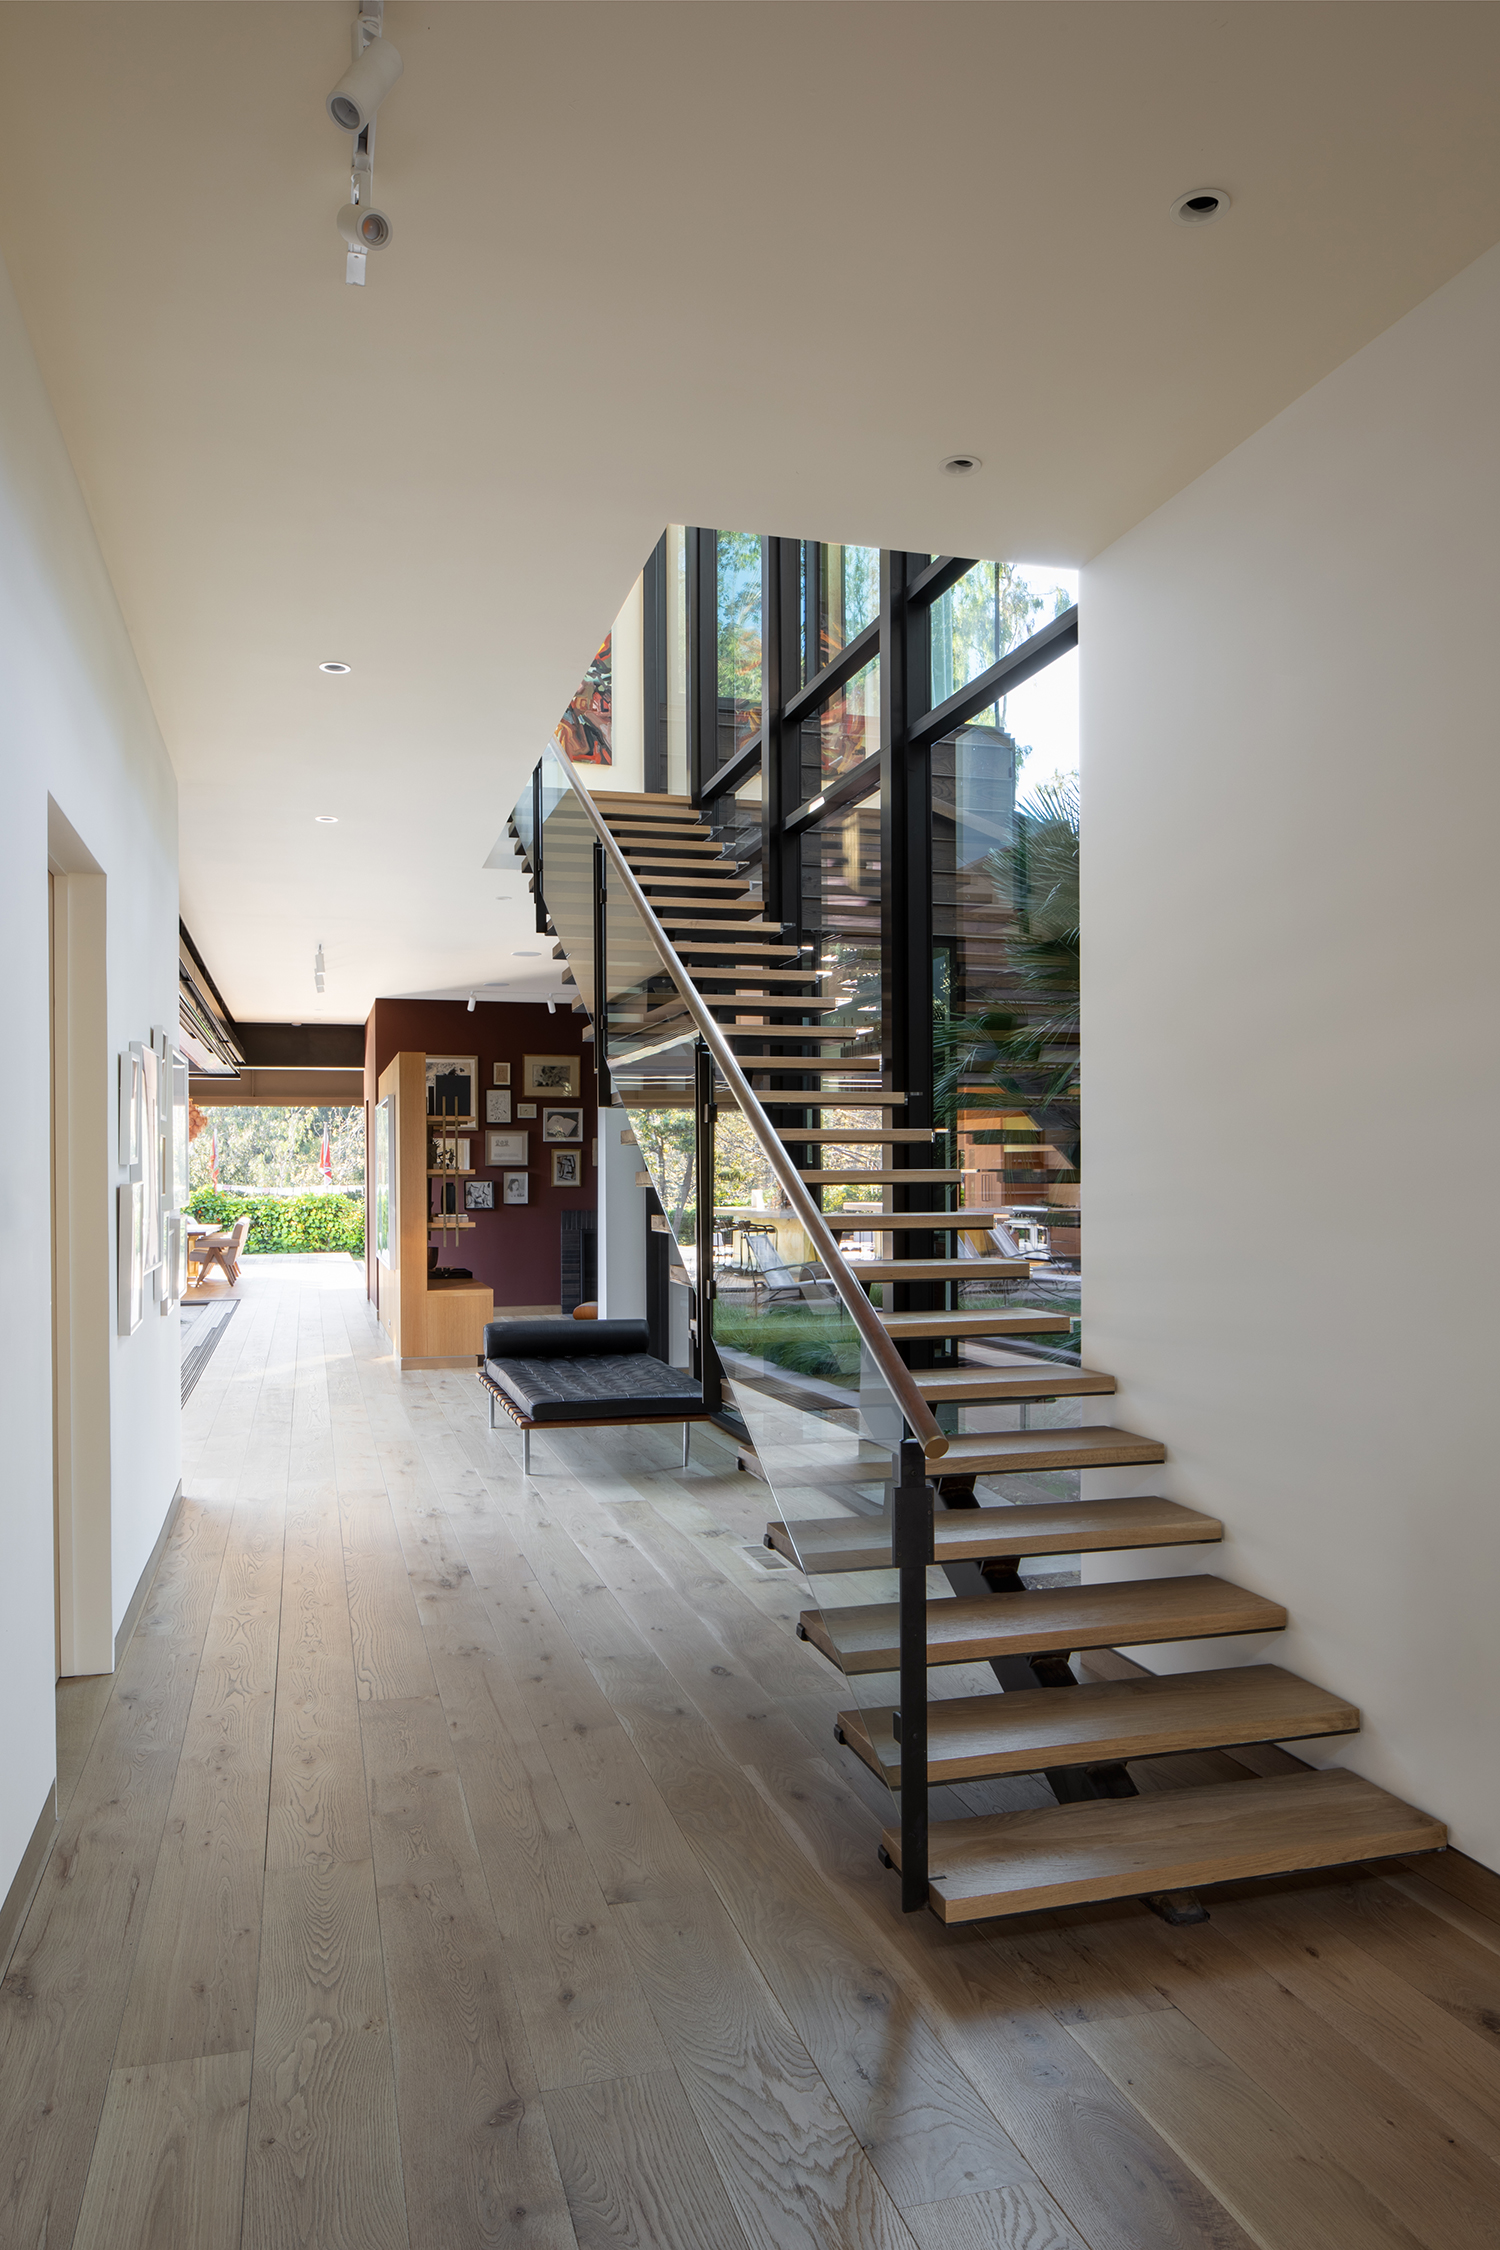 Rustic Canyon Residence, Los Angeles, USA / Conner + Perry Architects